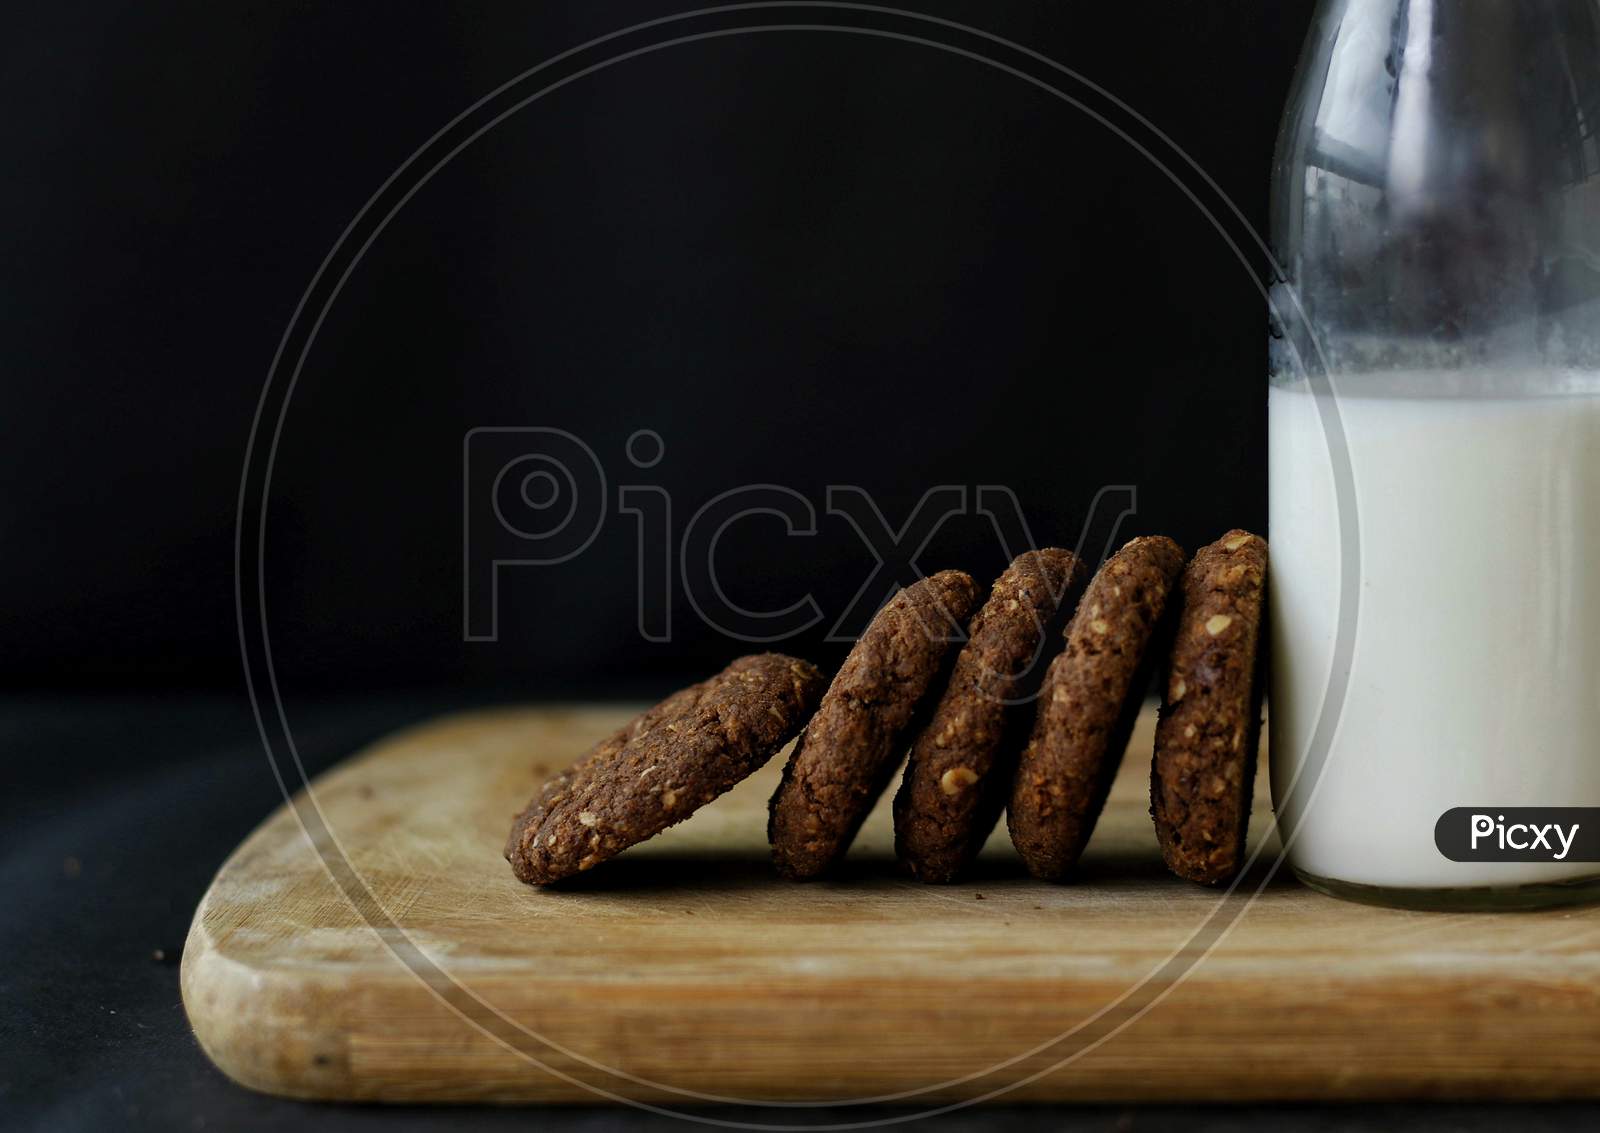 Chocolate And Oats Cookies Served With Milk Bottle On A Wooden Board